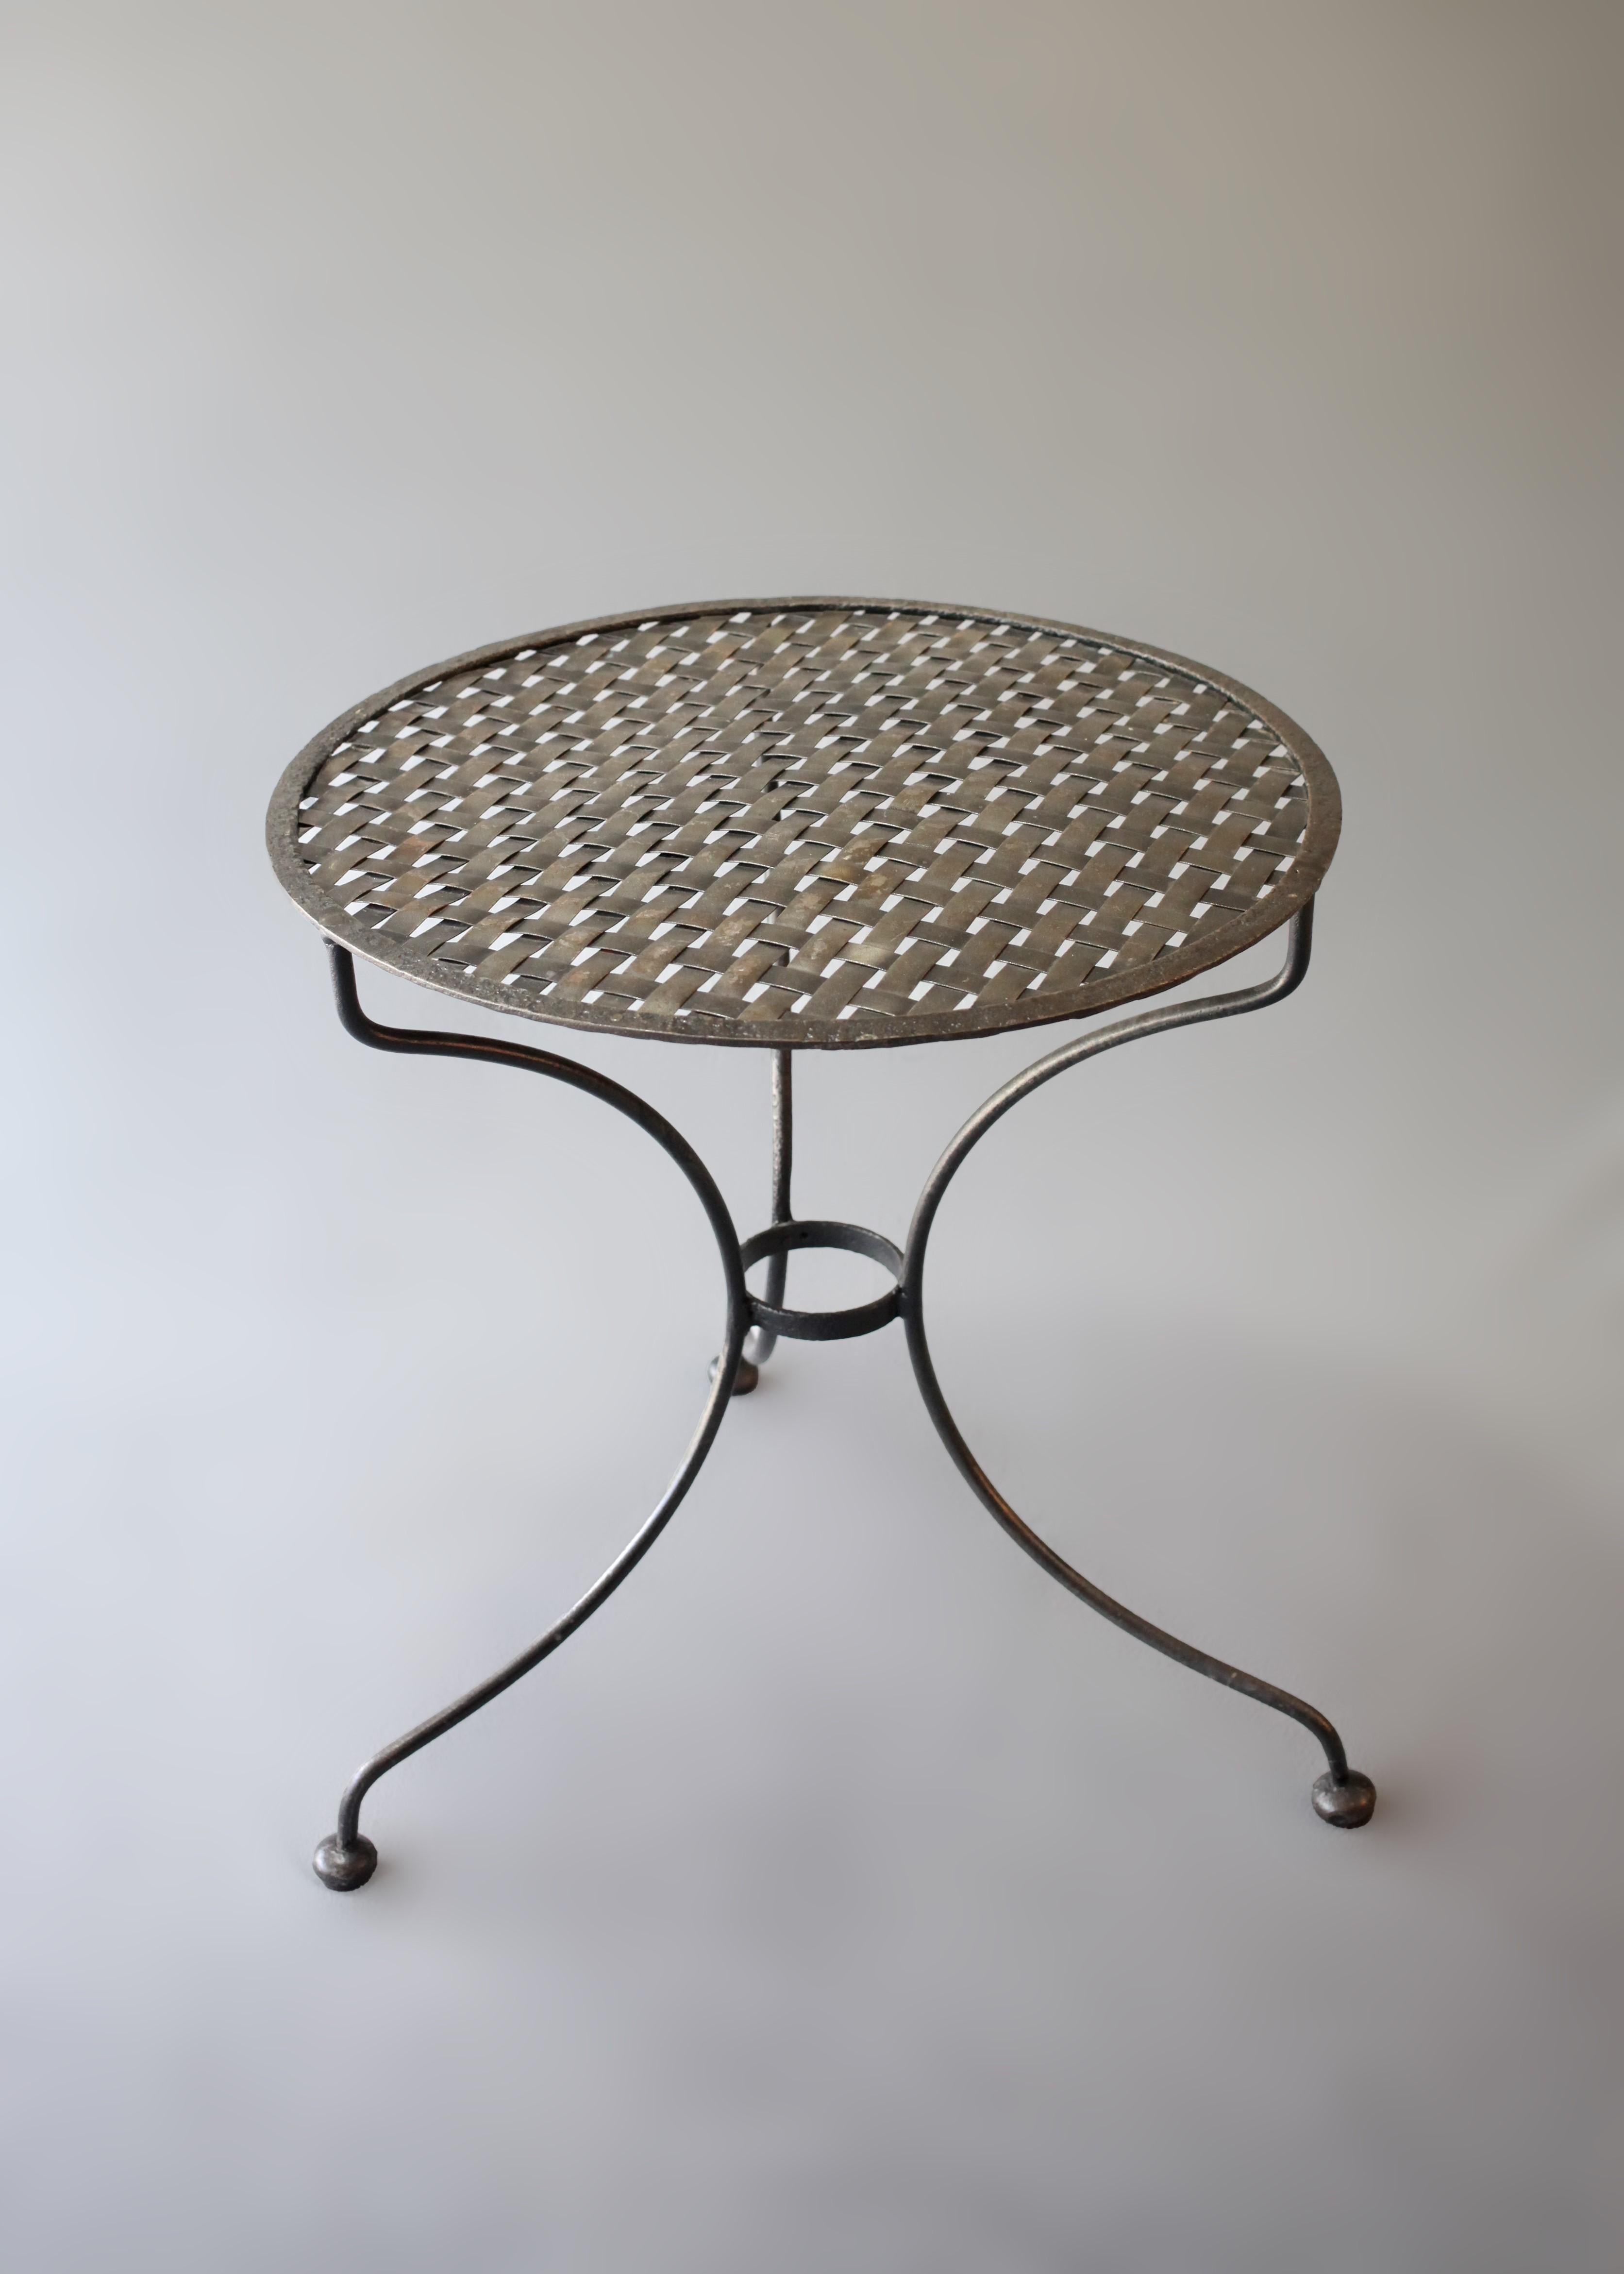 Rare 19th Century French Forged Iron Gueridon Garden Bistro Table In Good Condition For Sale In Austin, TX